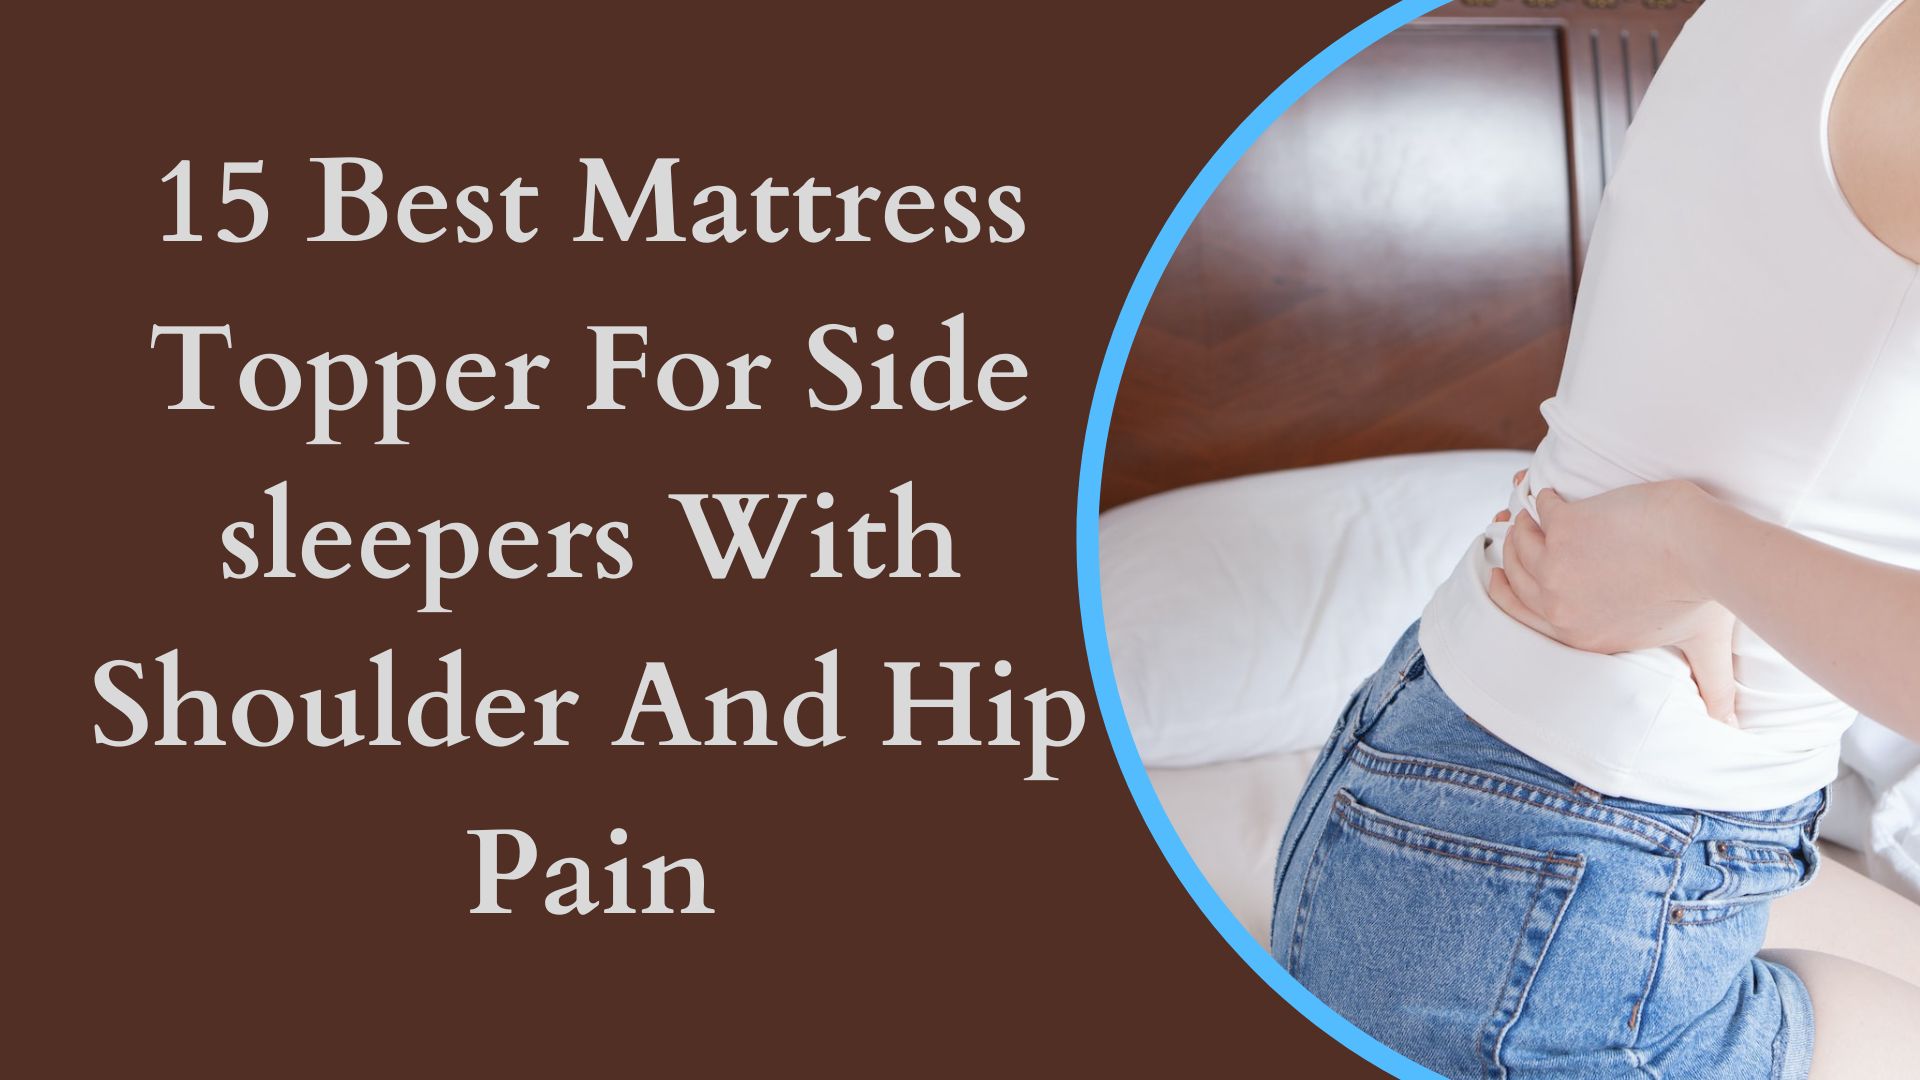 10 Best Mattress Topper For side sleepers with shoulder and hip pain